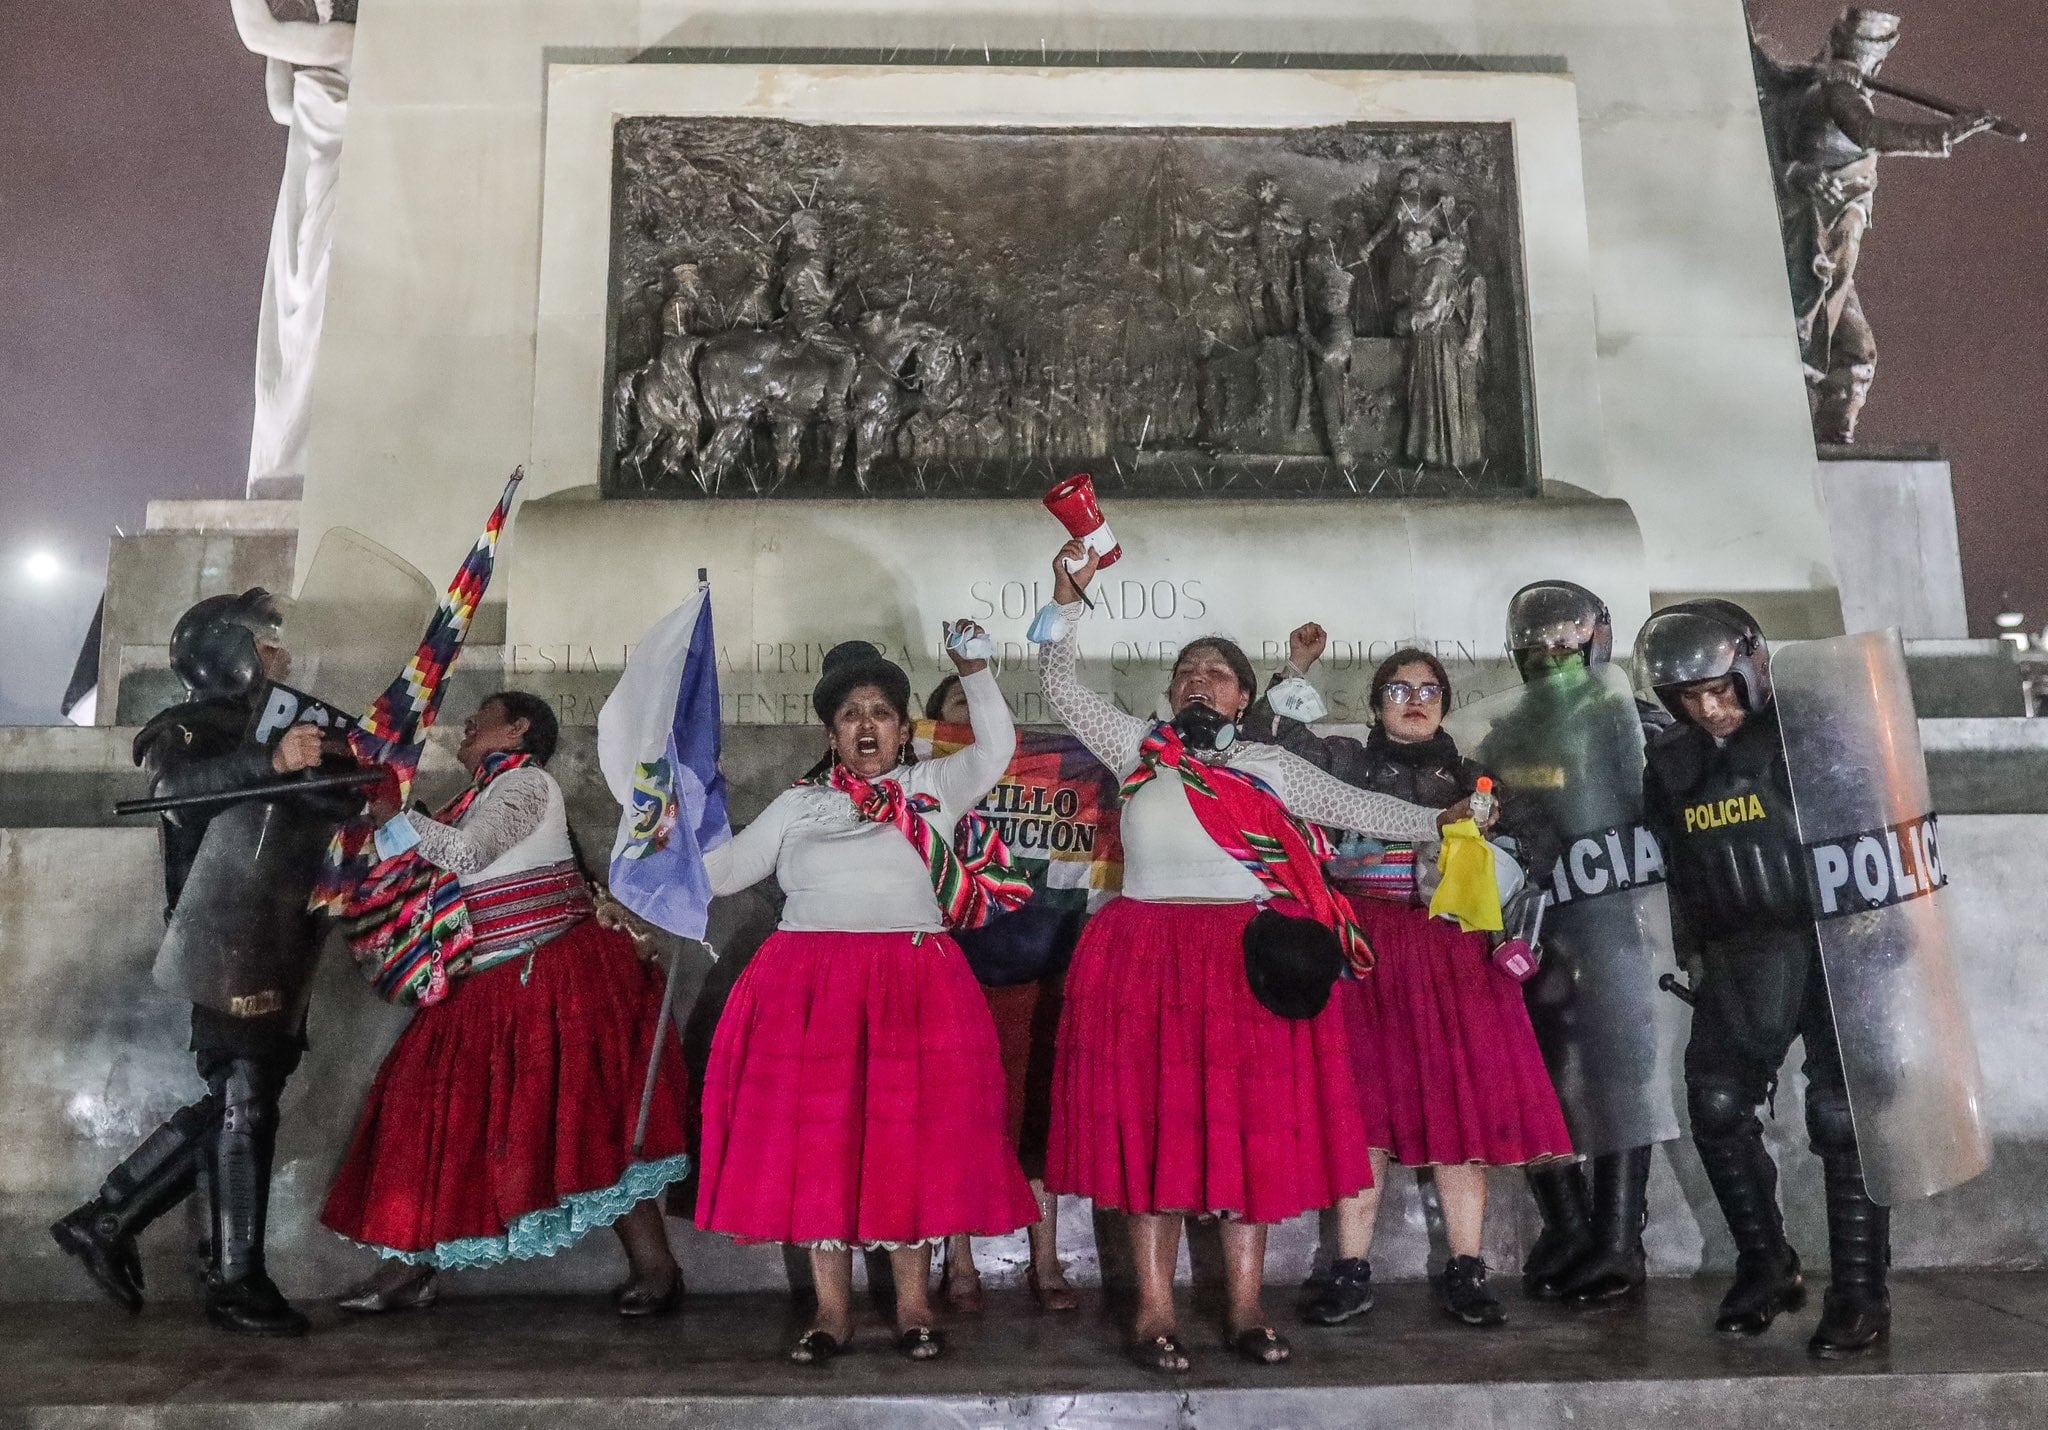 Aymara women denounce violent repression while resisting the Peruvian police in recent protests. Photo: EFE/Aldair Mejía.